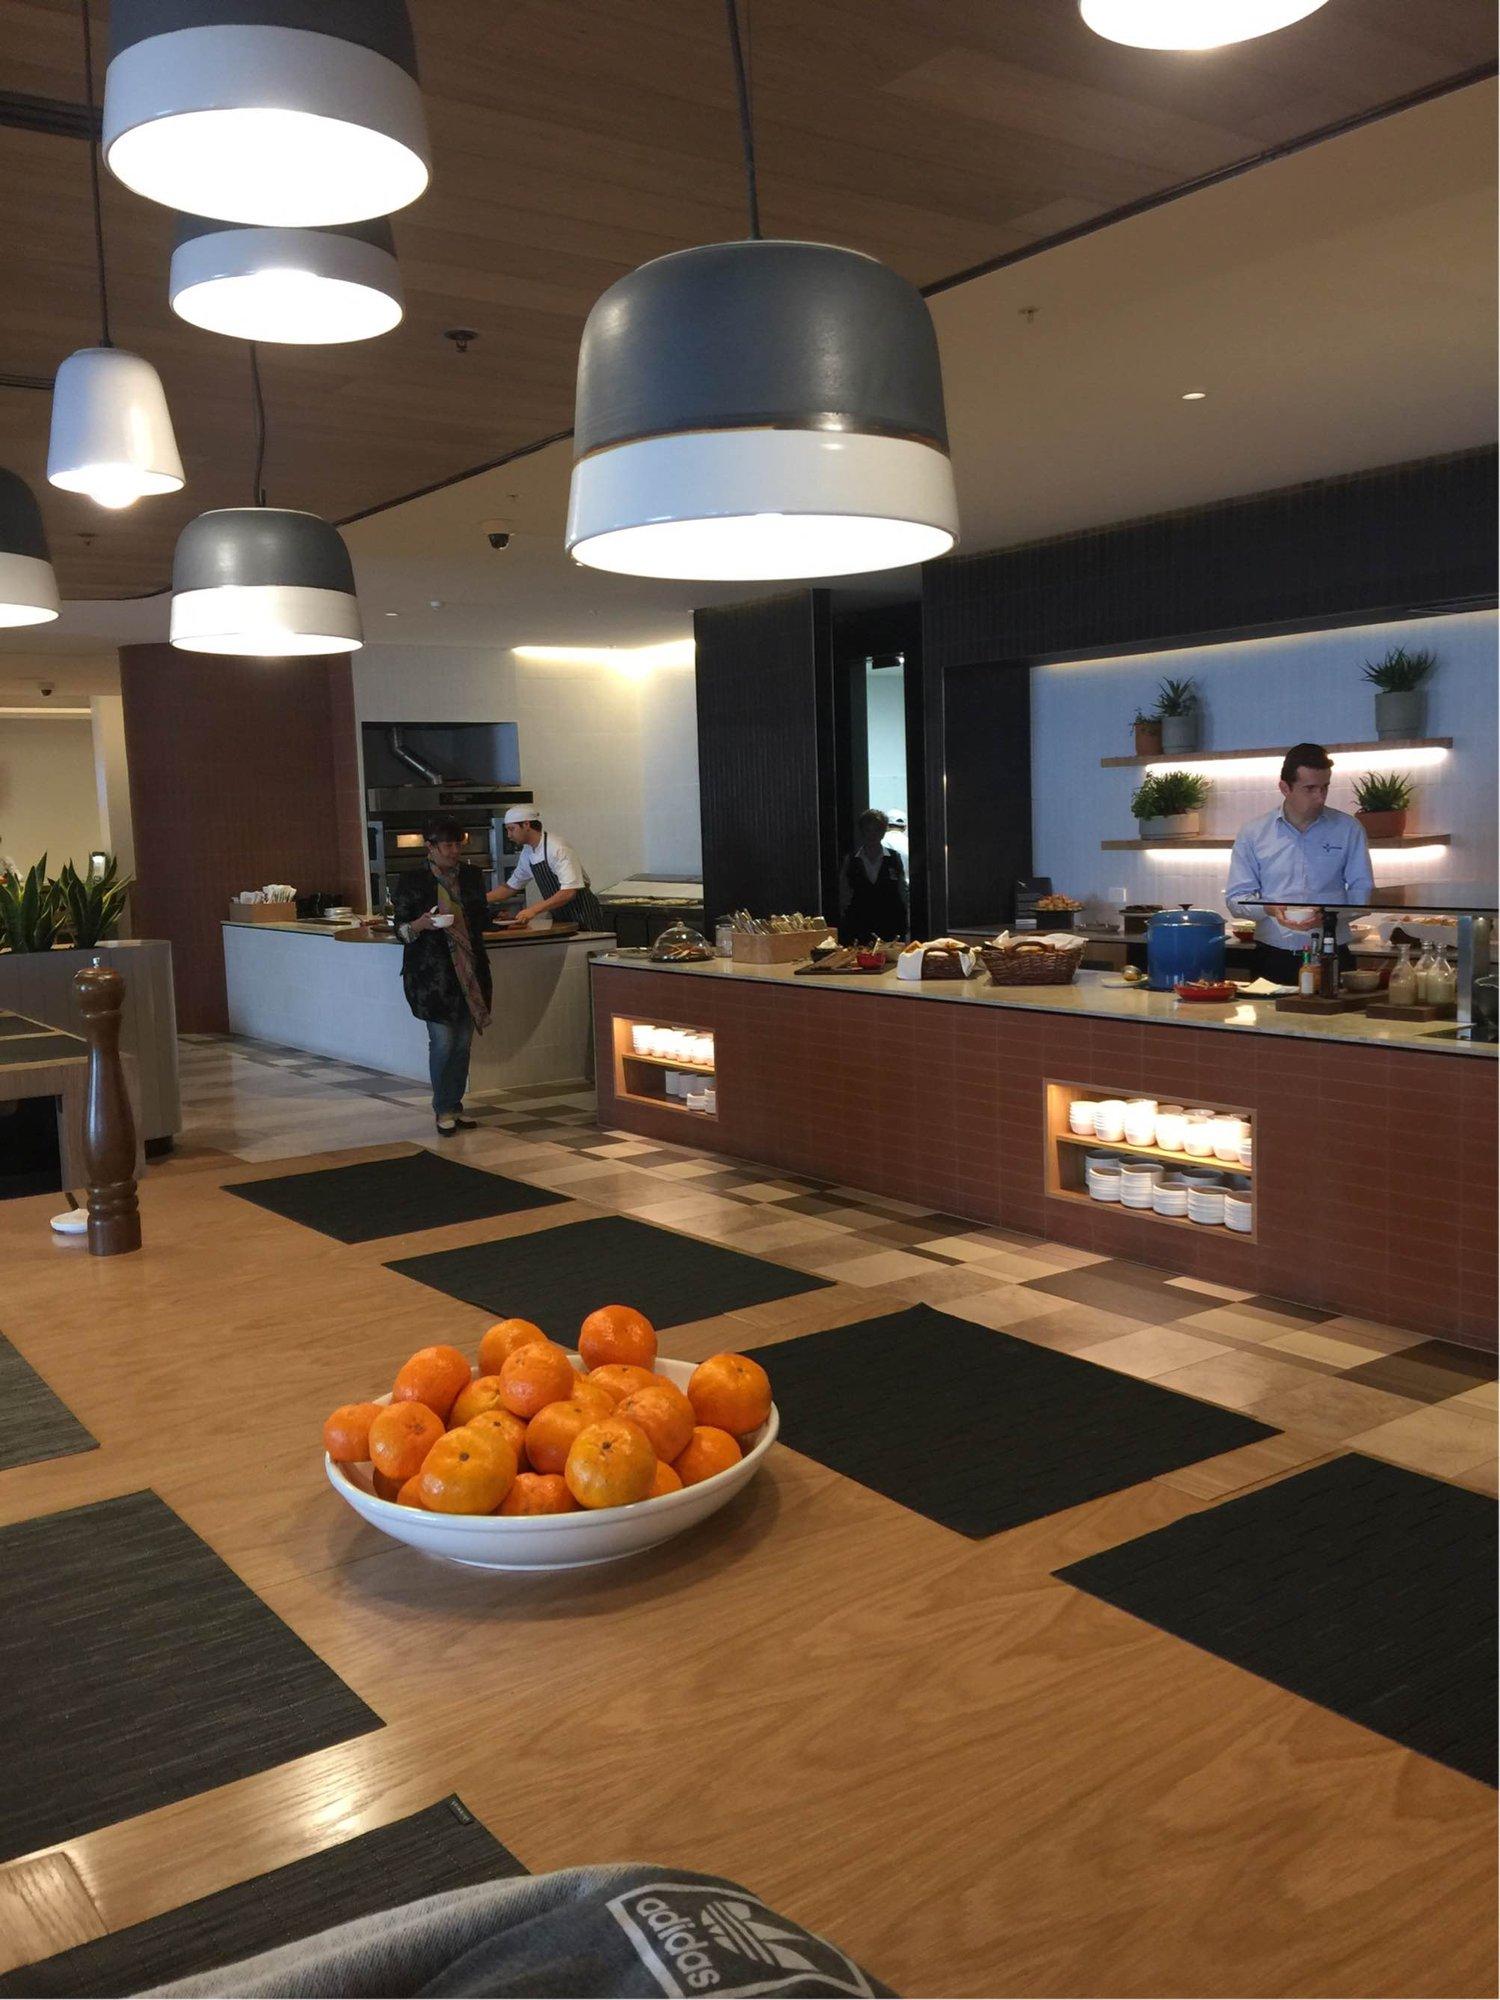 Qantas Airways Domestic and International Business Lounge image 4 of 5